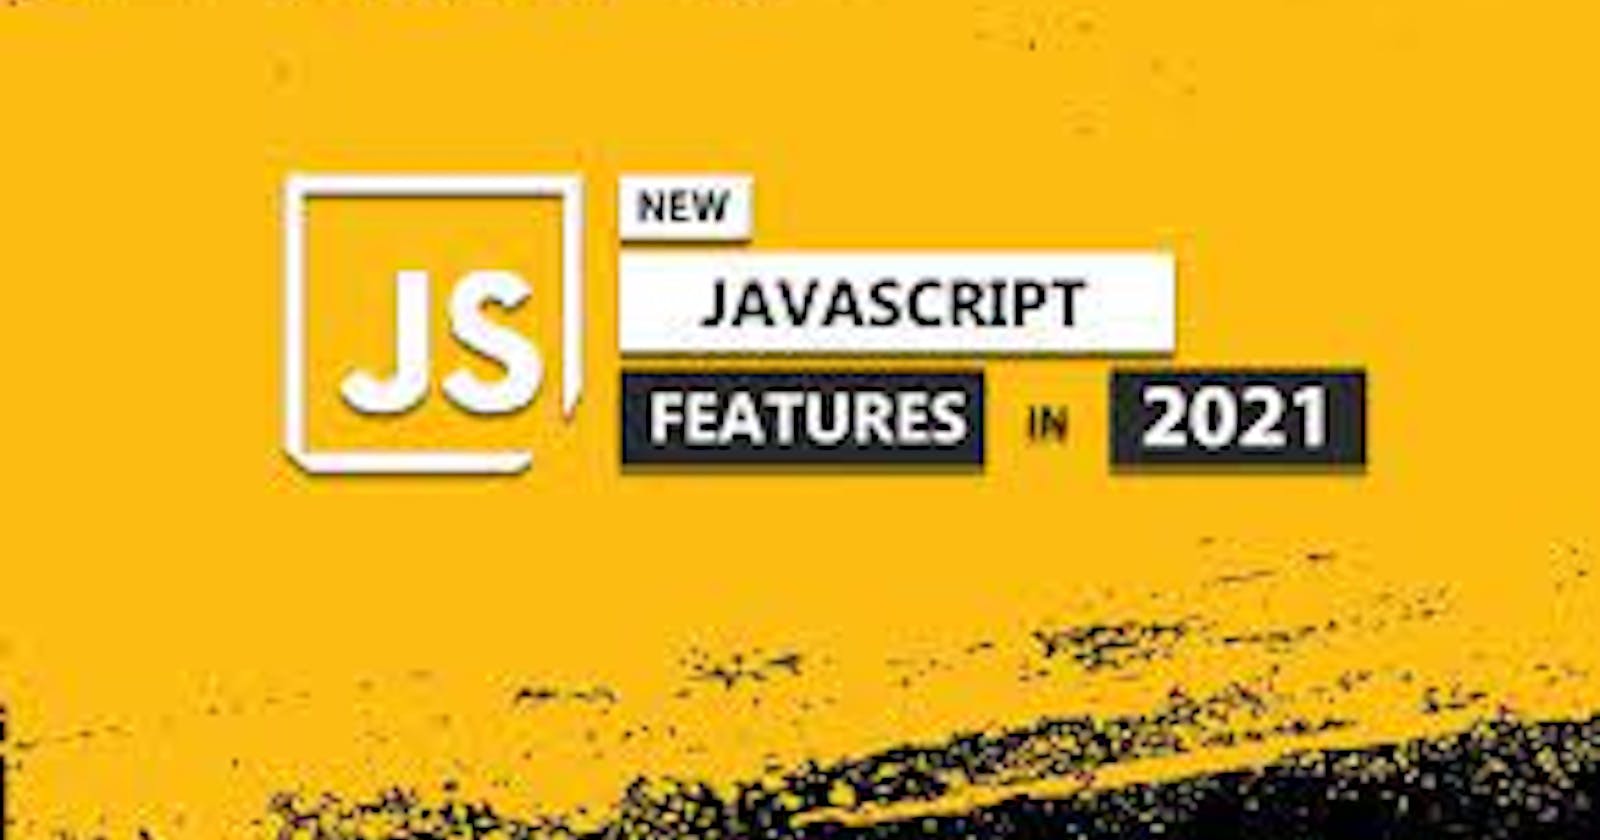 New Features in JavaScript